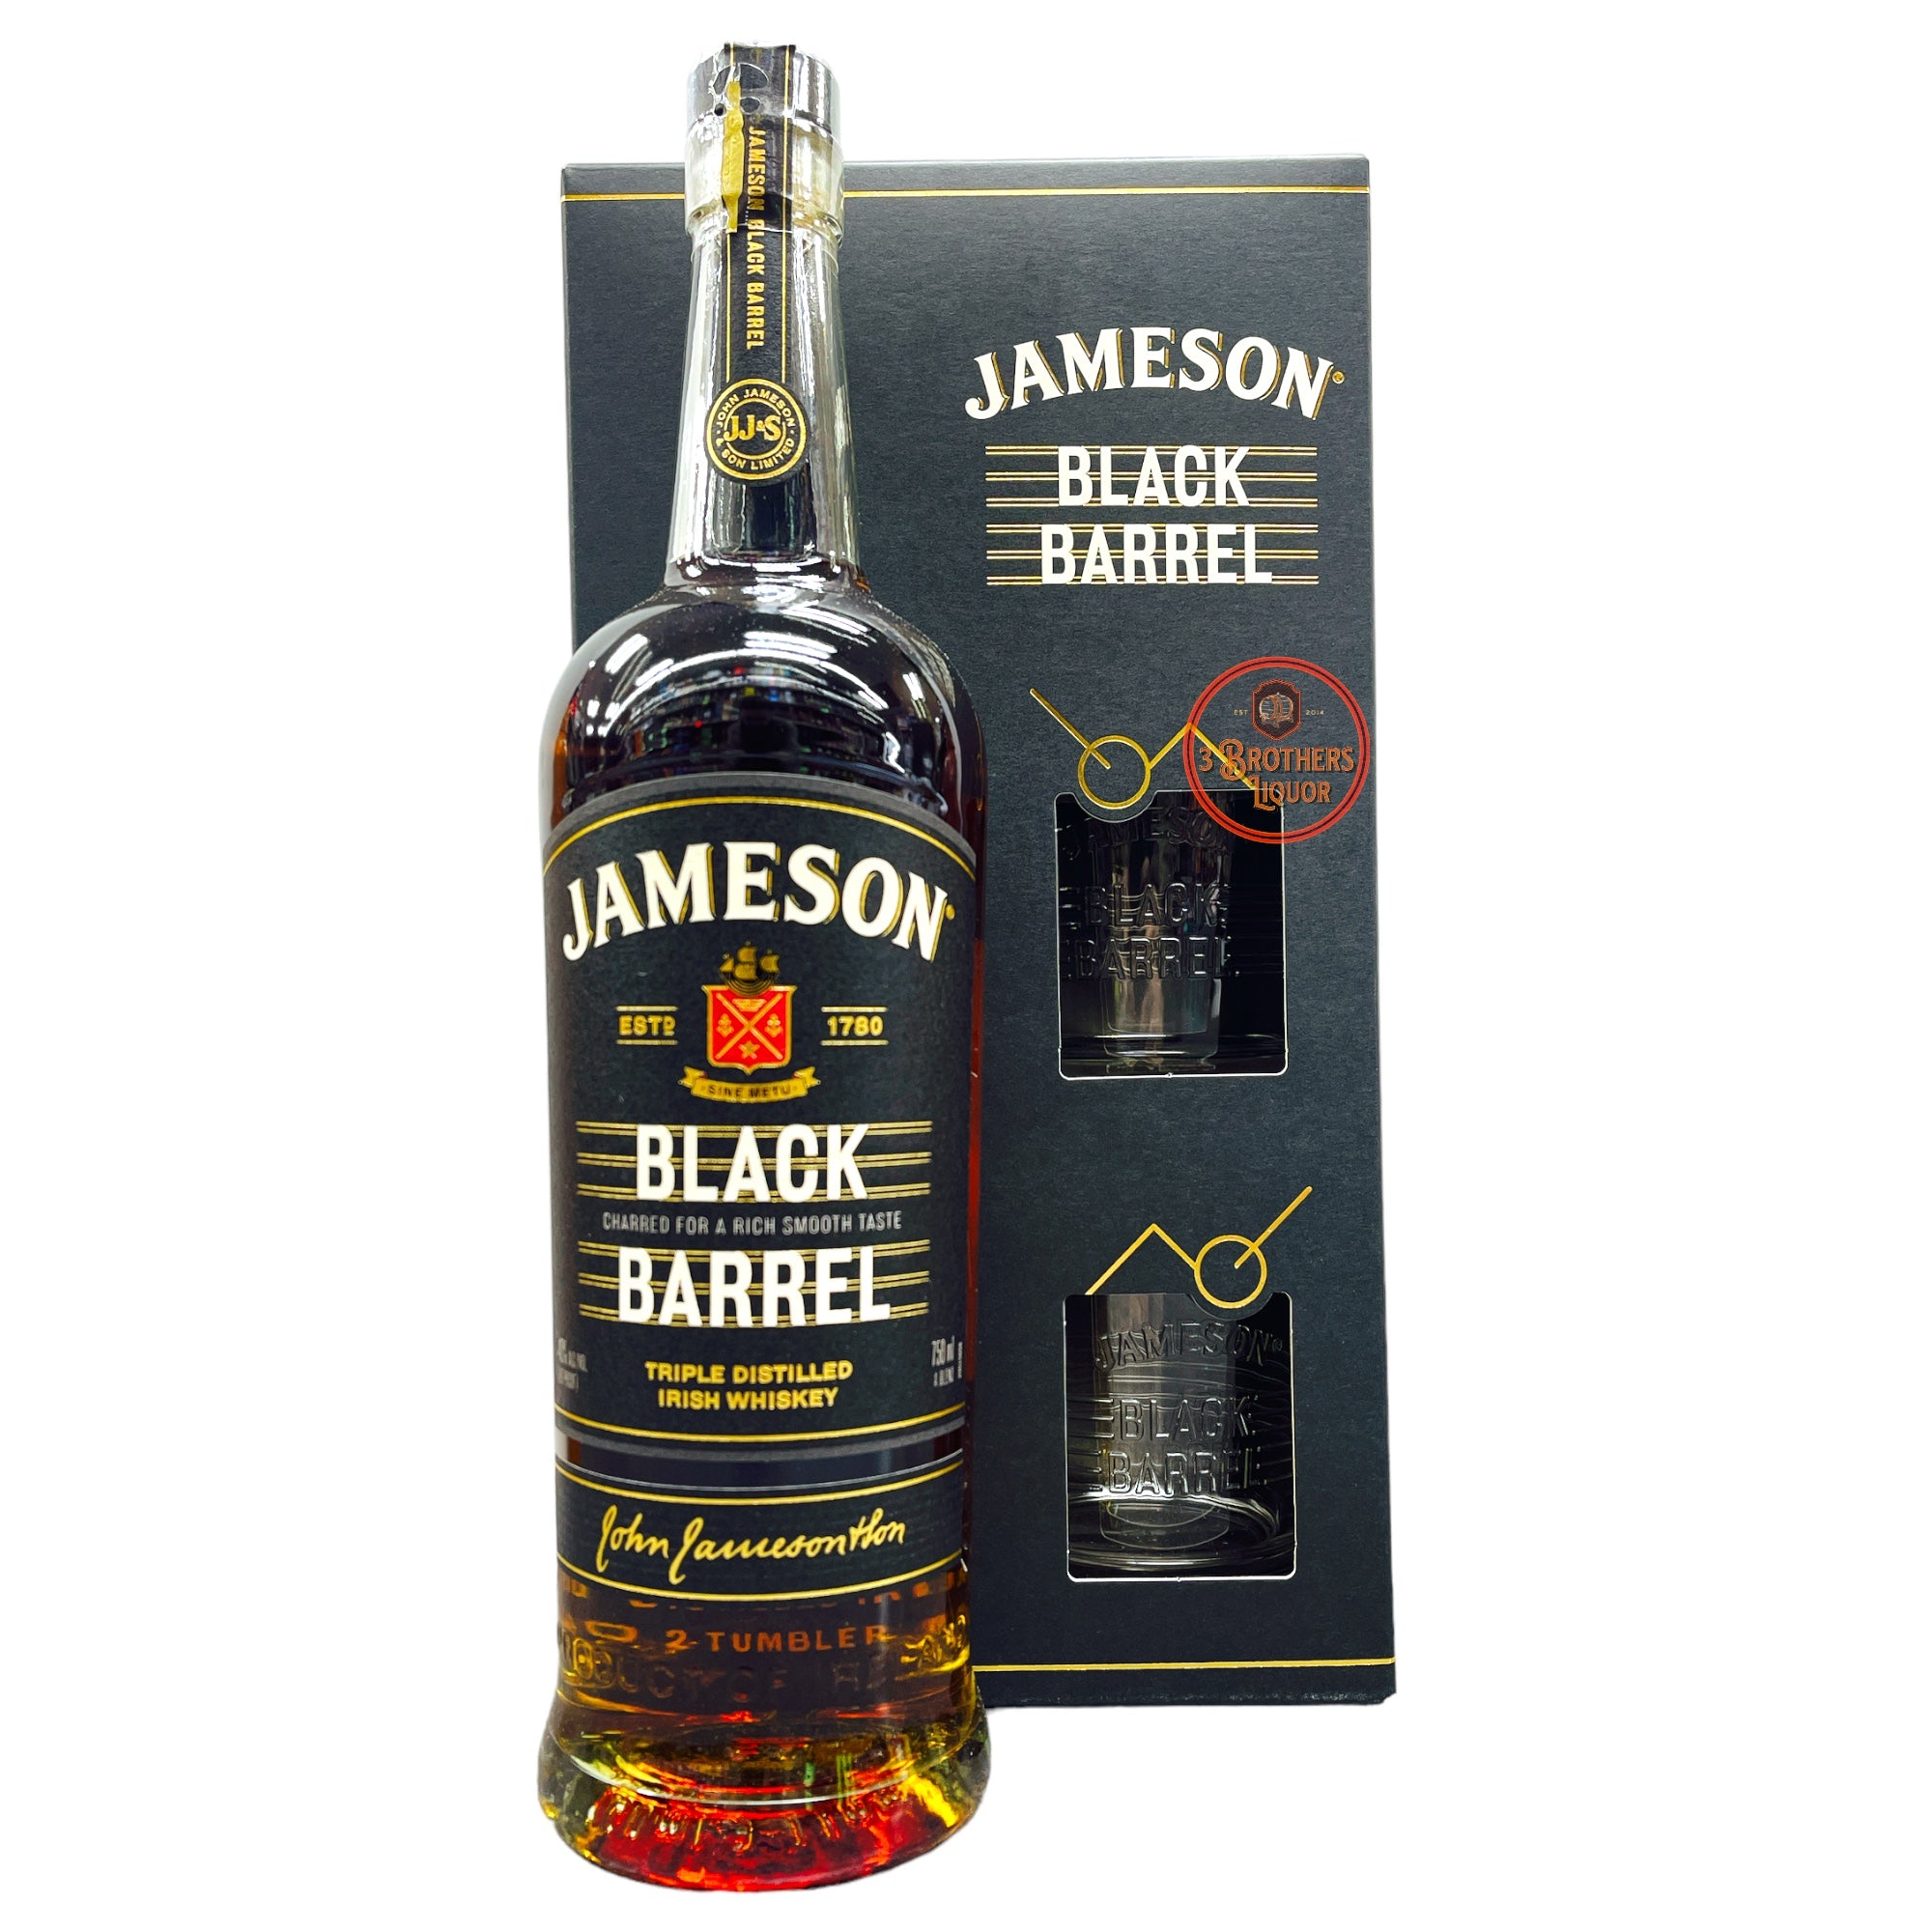 Jameson Black Barrel W/ 2 Jameson Black Barrel Glasses Gift Set (Limited Edition)